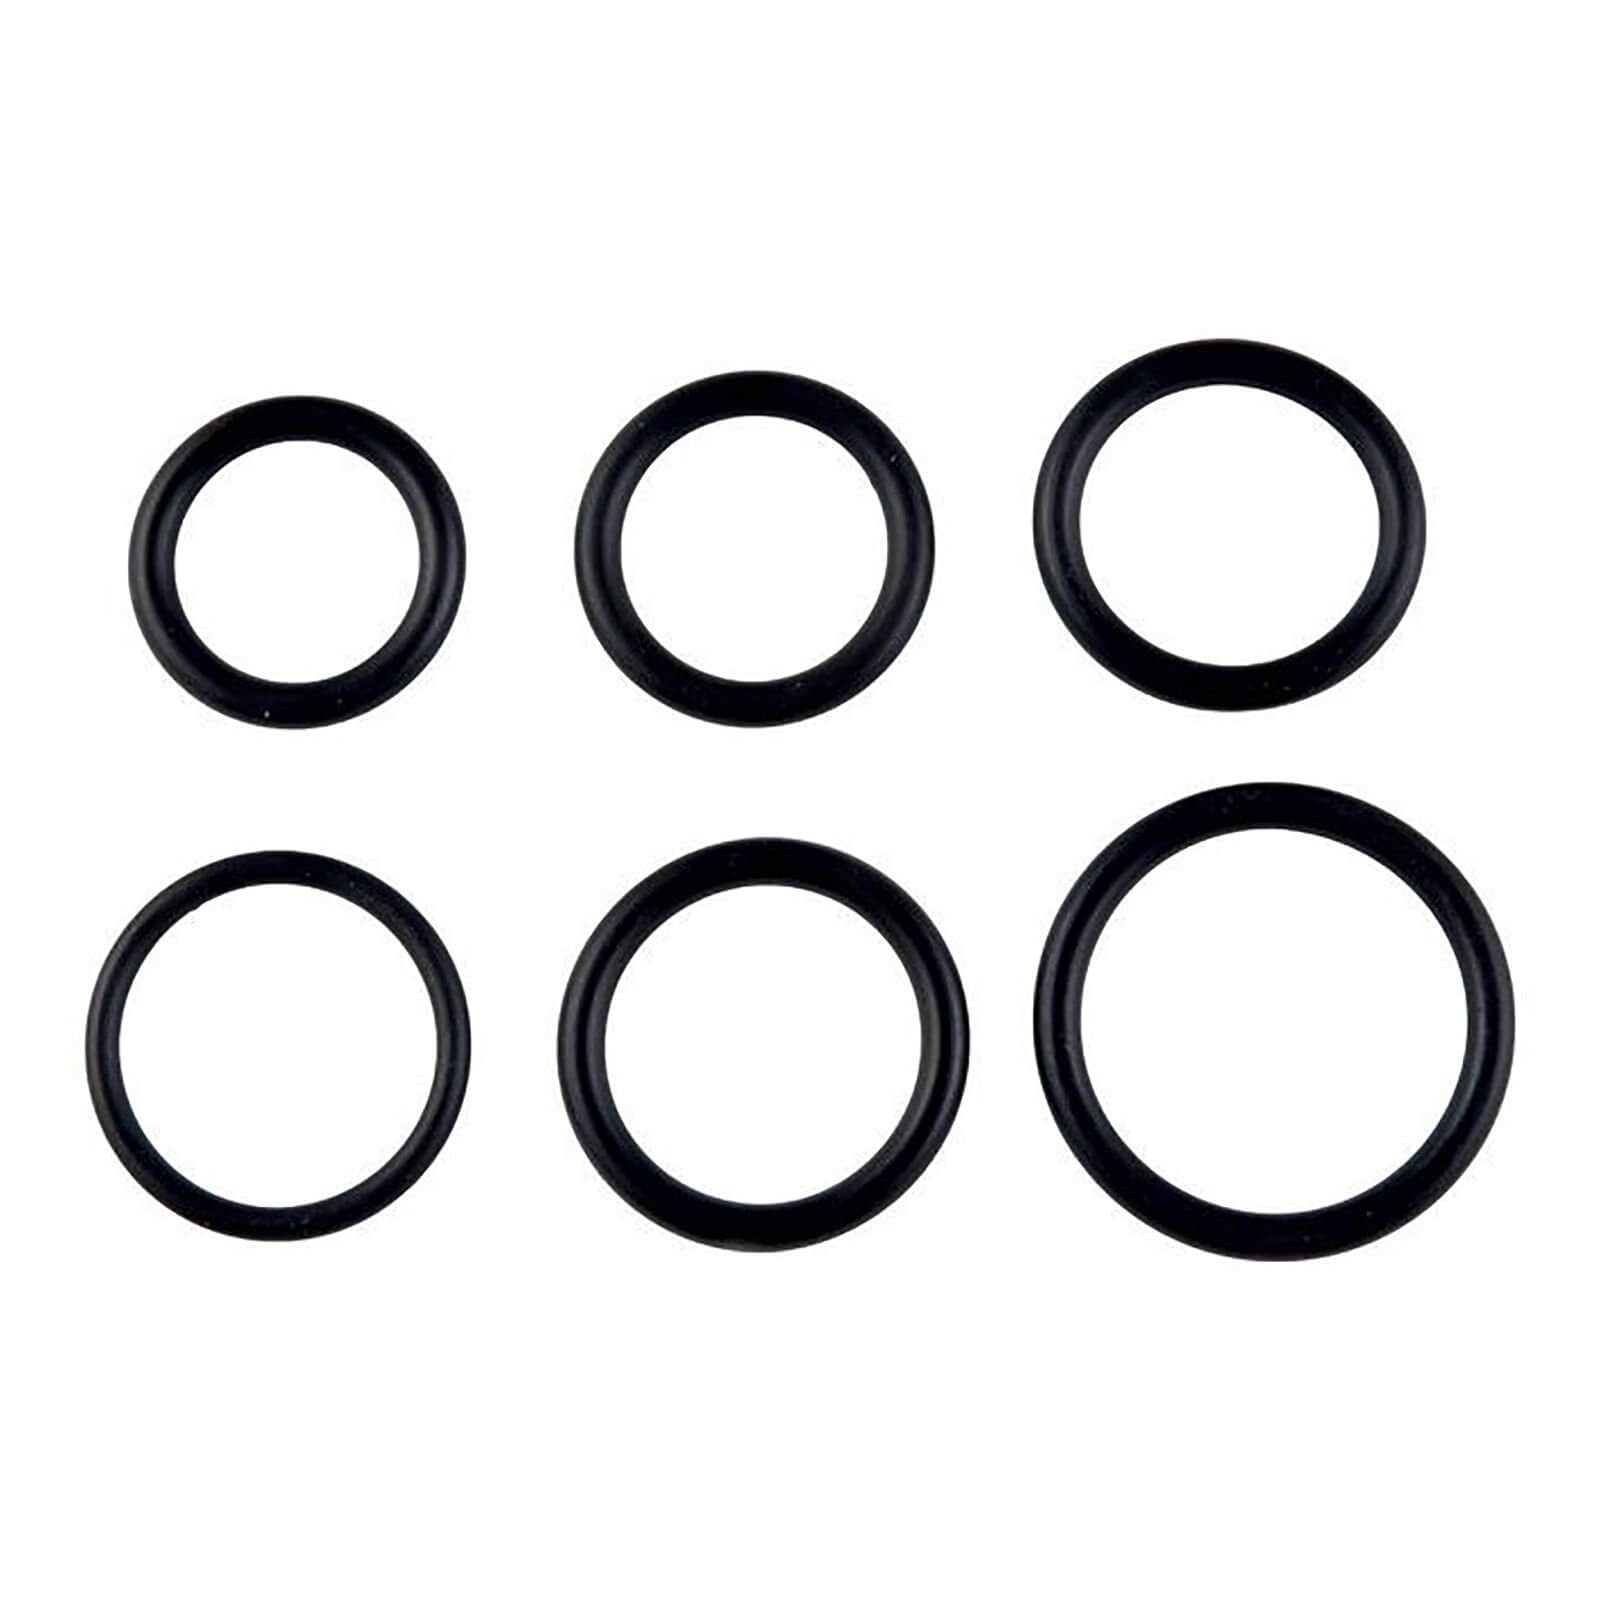 Large O Rings - Assorted